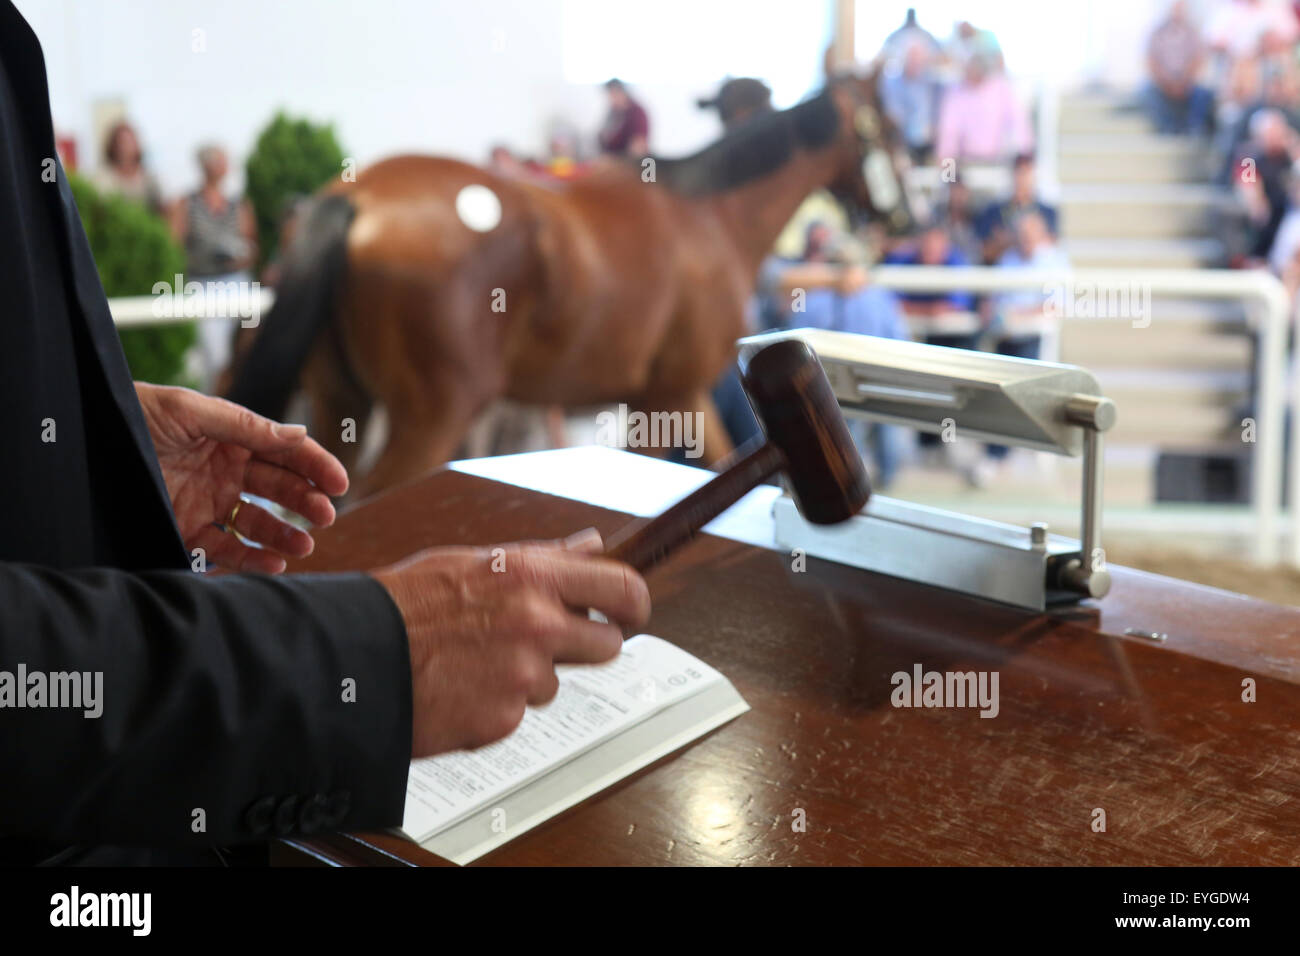 Iffezheim, Germany, Symbolfoto, a horse will be auctioned off at auction Stock Photo